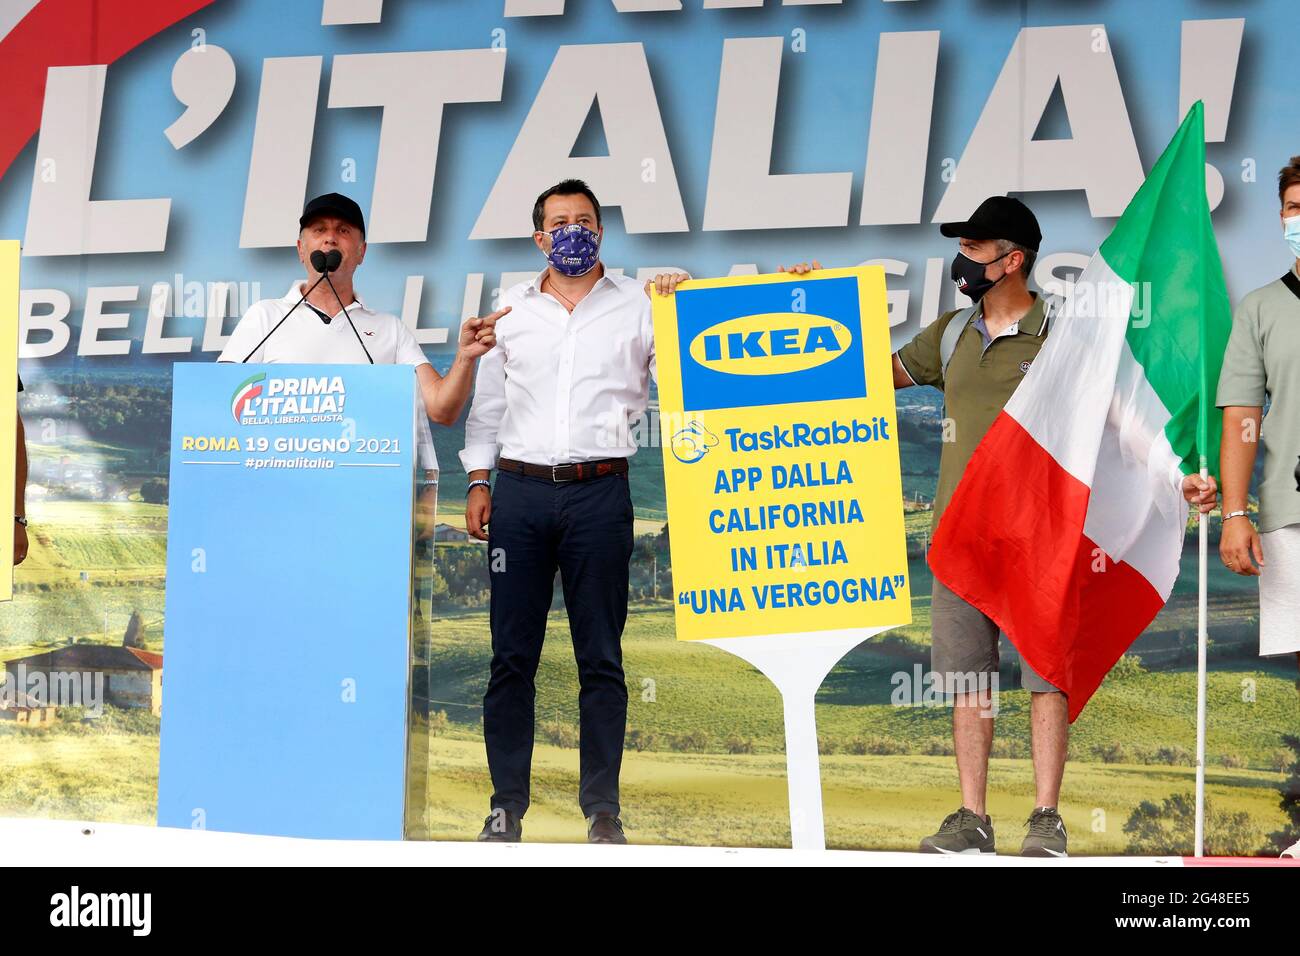 Rome, Italy. 19th June, 2021. Secretary of Lega Matteo Salvini on the stage  with the workers of Ikea during the demonstration 'Italy first!' in Piazza  Bocca della Verità'.Rome (Italy), June 19th 2021